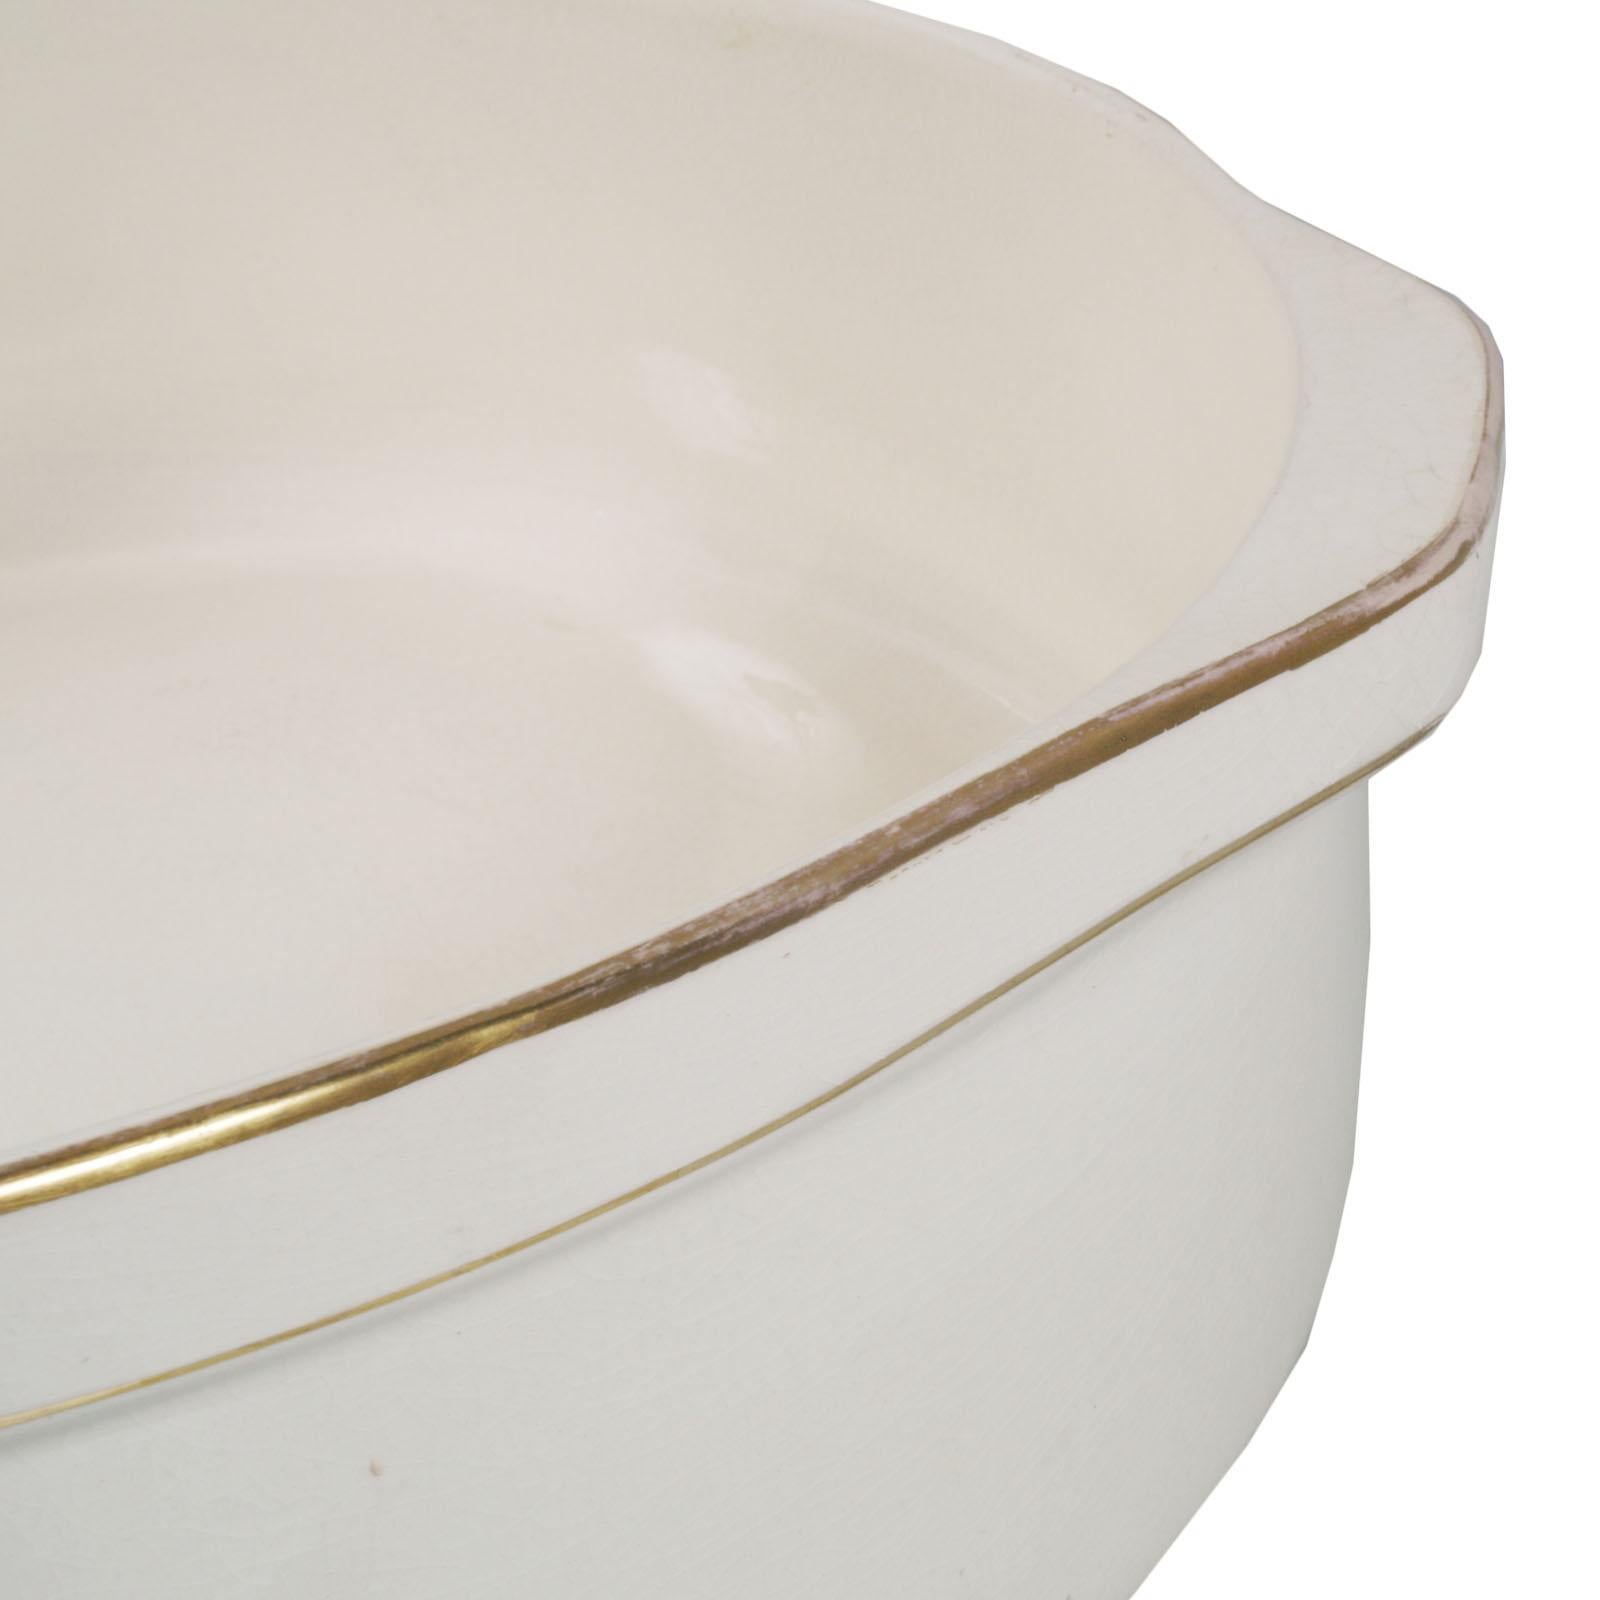 1930s circa glazed large ceramic basin by Villeroy & Boch , Mettlach , Germany
External gilt profiling decorative . On the upper edge two handles are shaped to facilitate the movement of the piece .
The piece is intact and free from breakage,